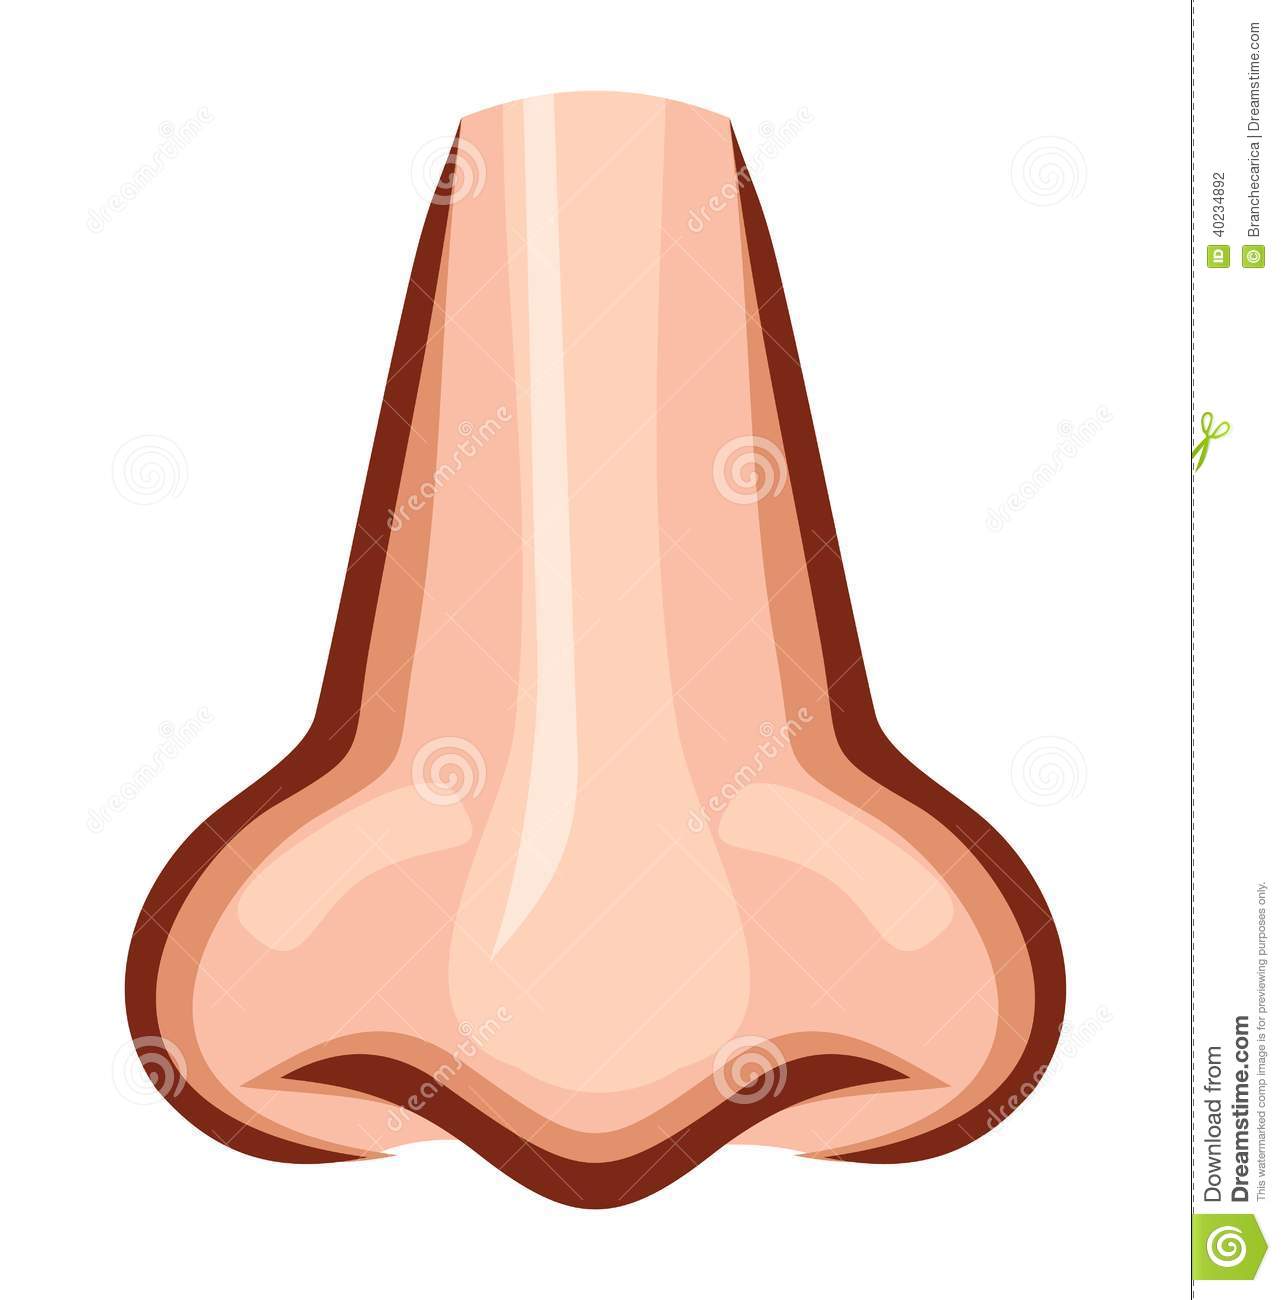 Nose clipart for.